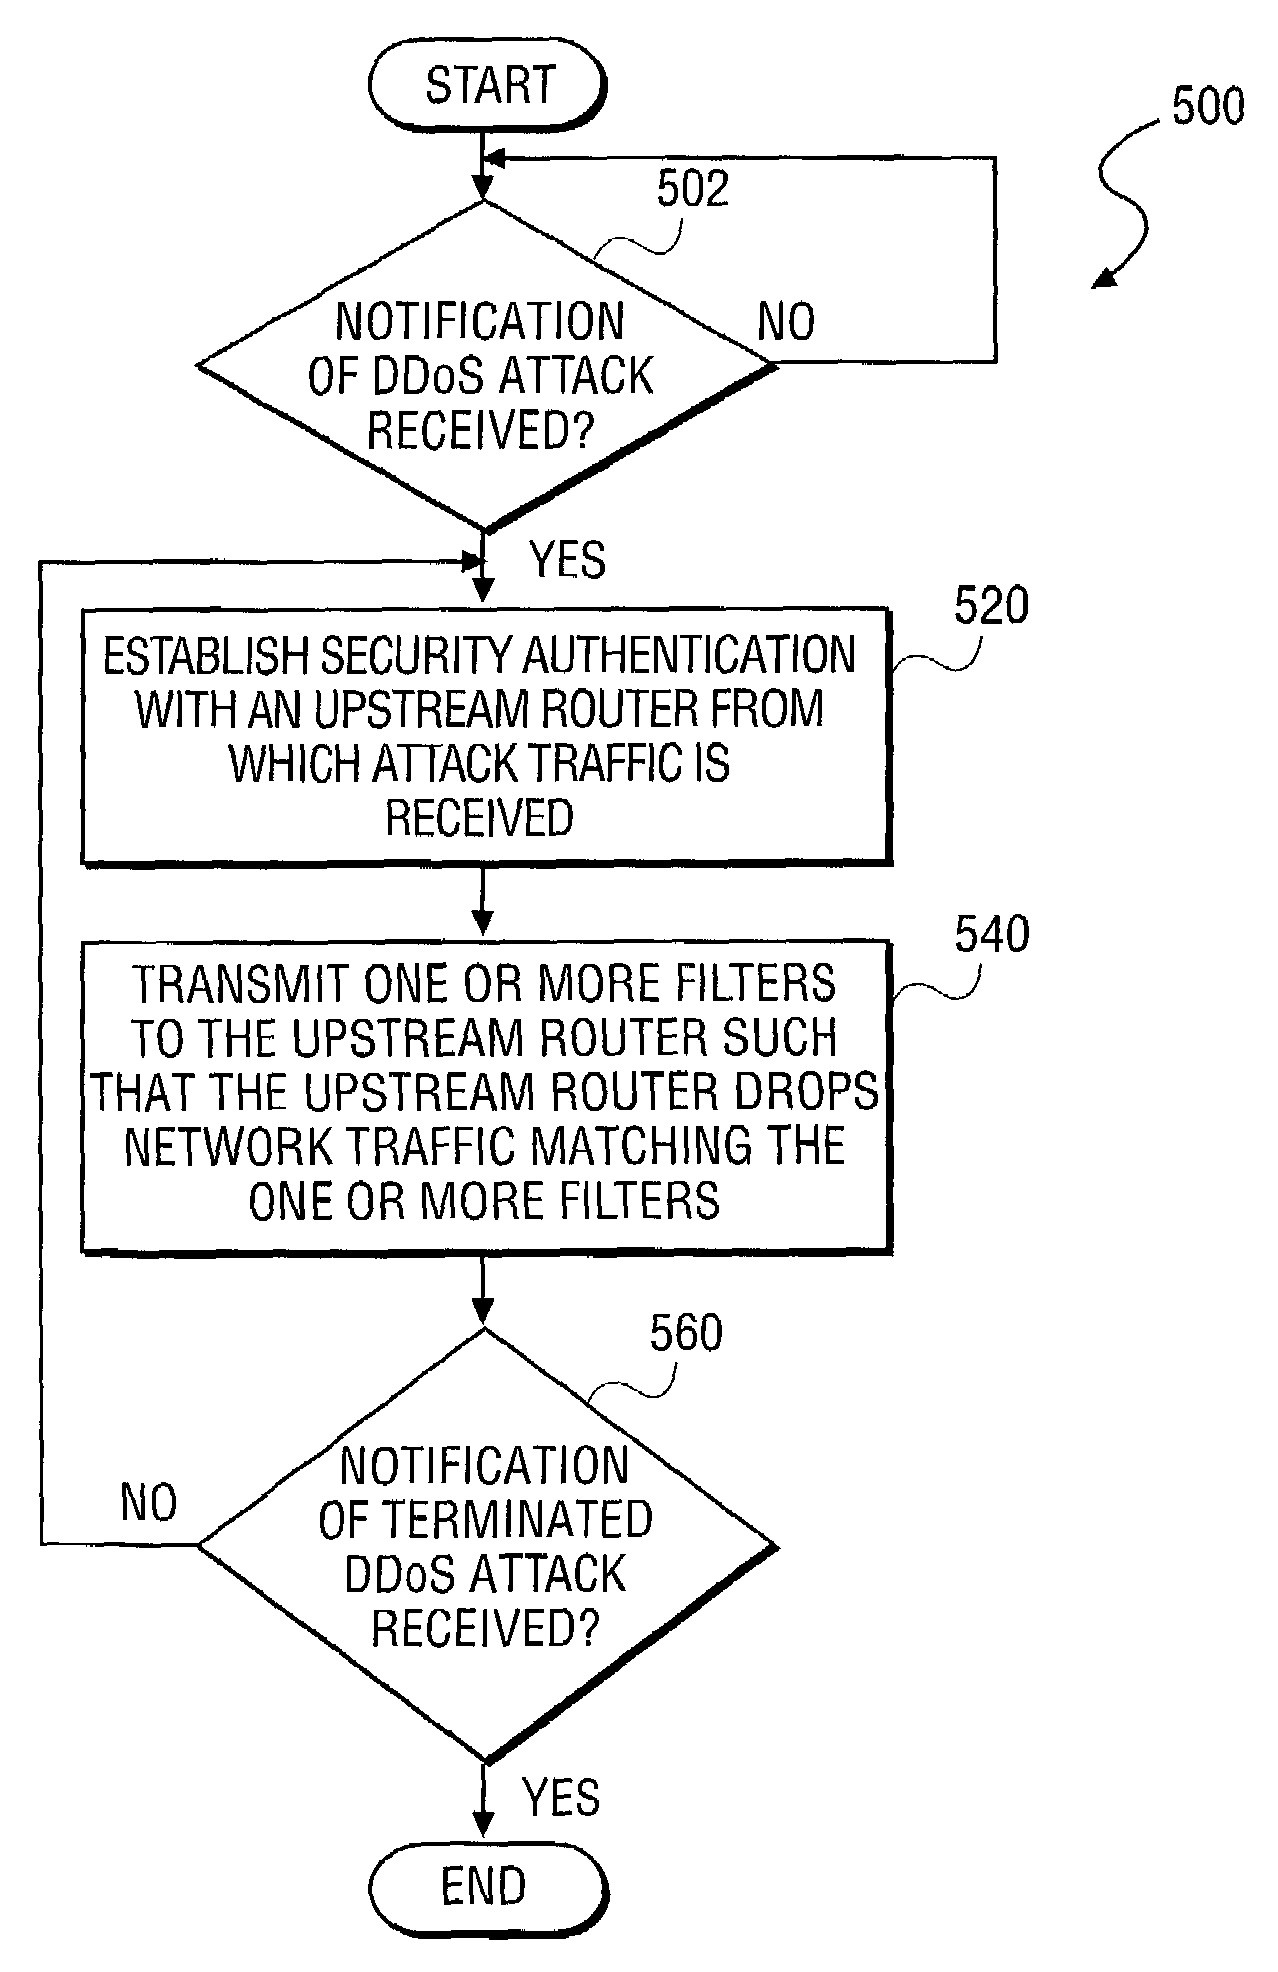 Apparatus and method for secure, automated response to distributed denial of service attacks